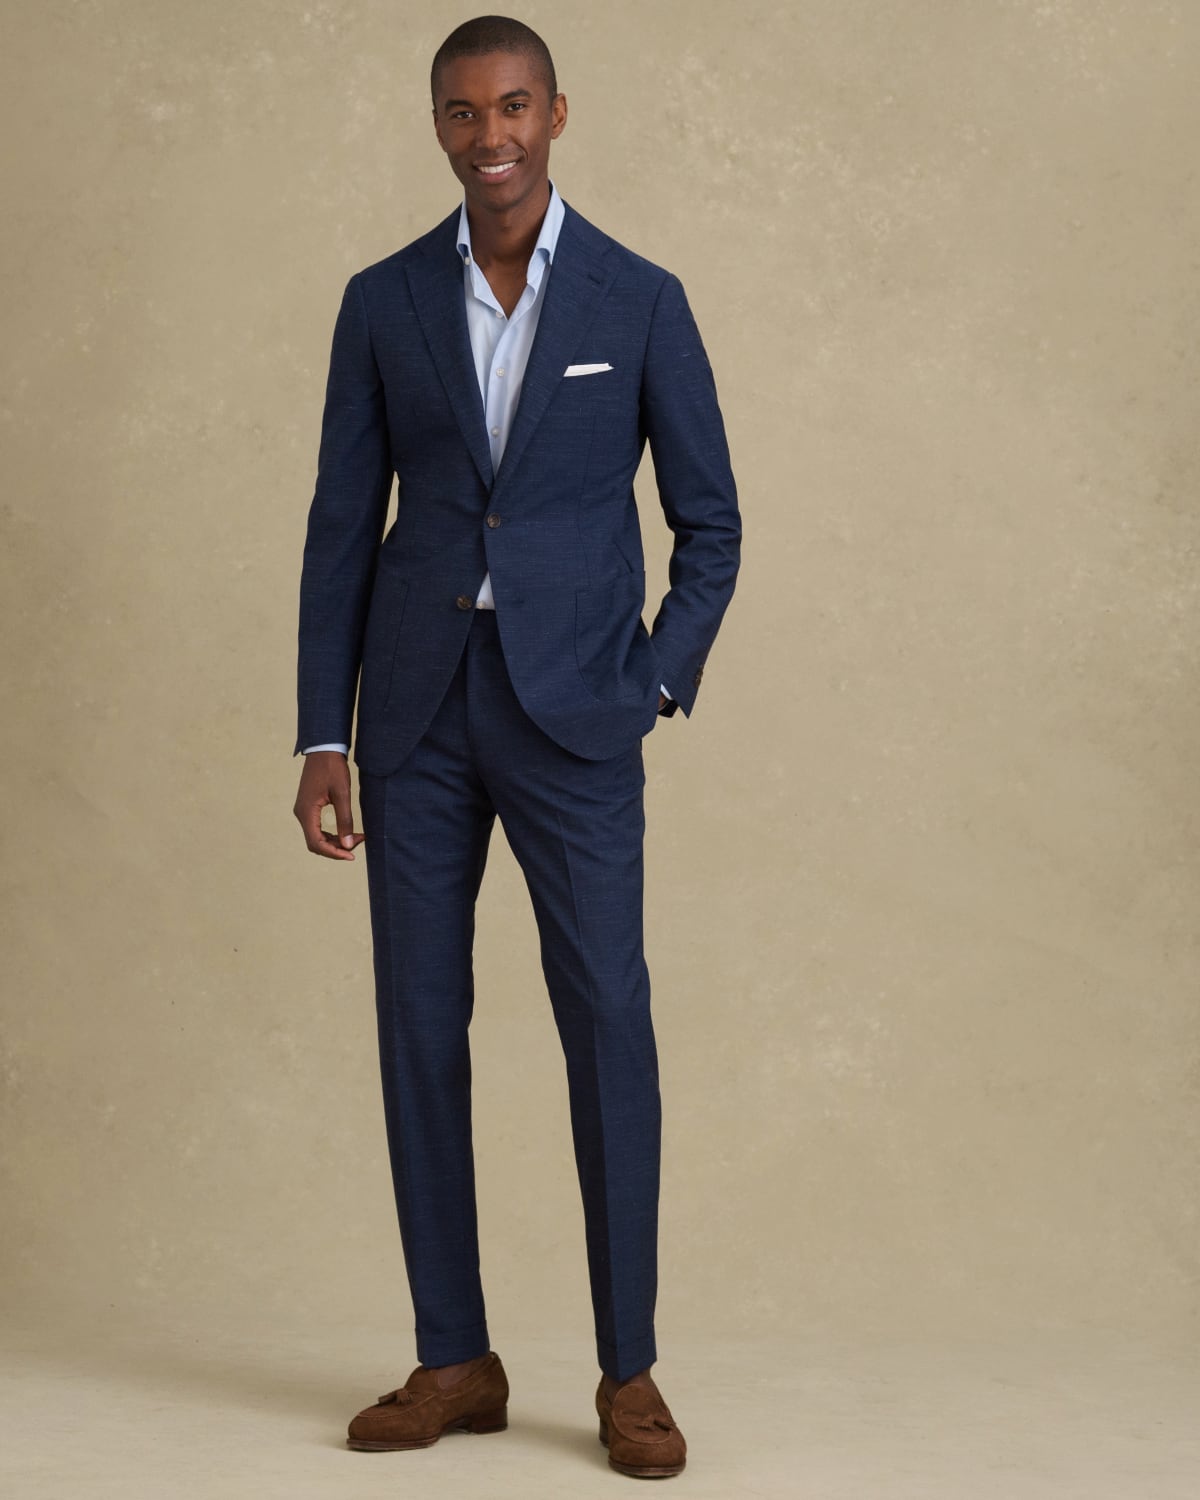 What to Wear to a Spring Wedding: Semi-Formal Attire